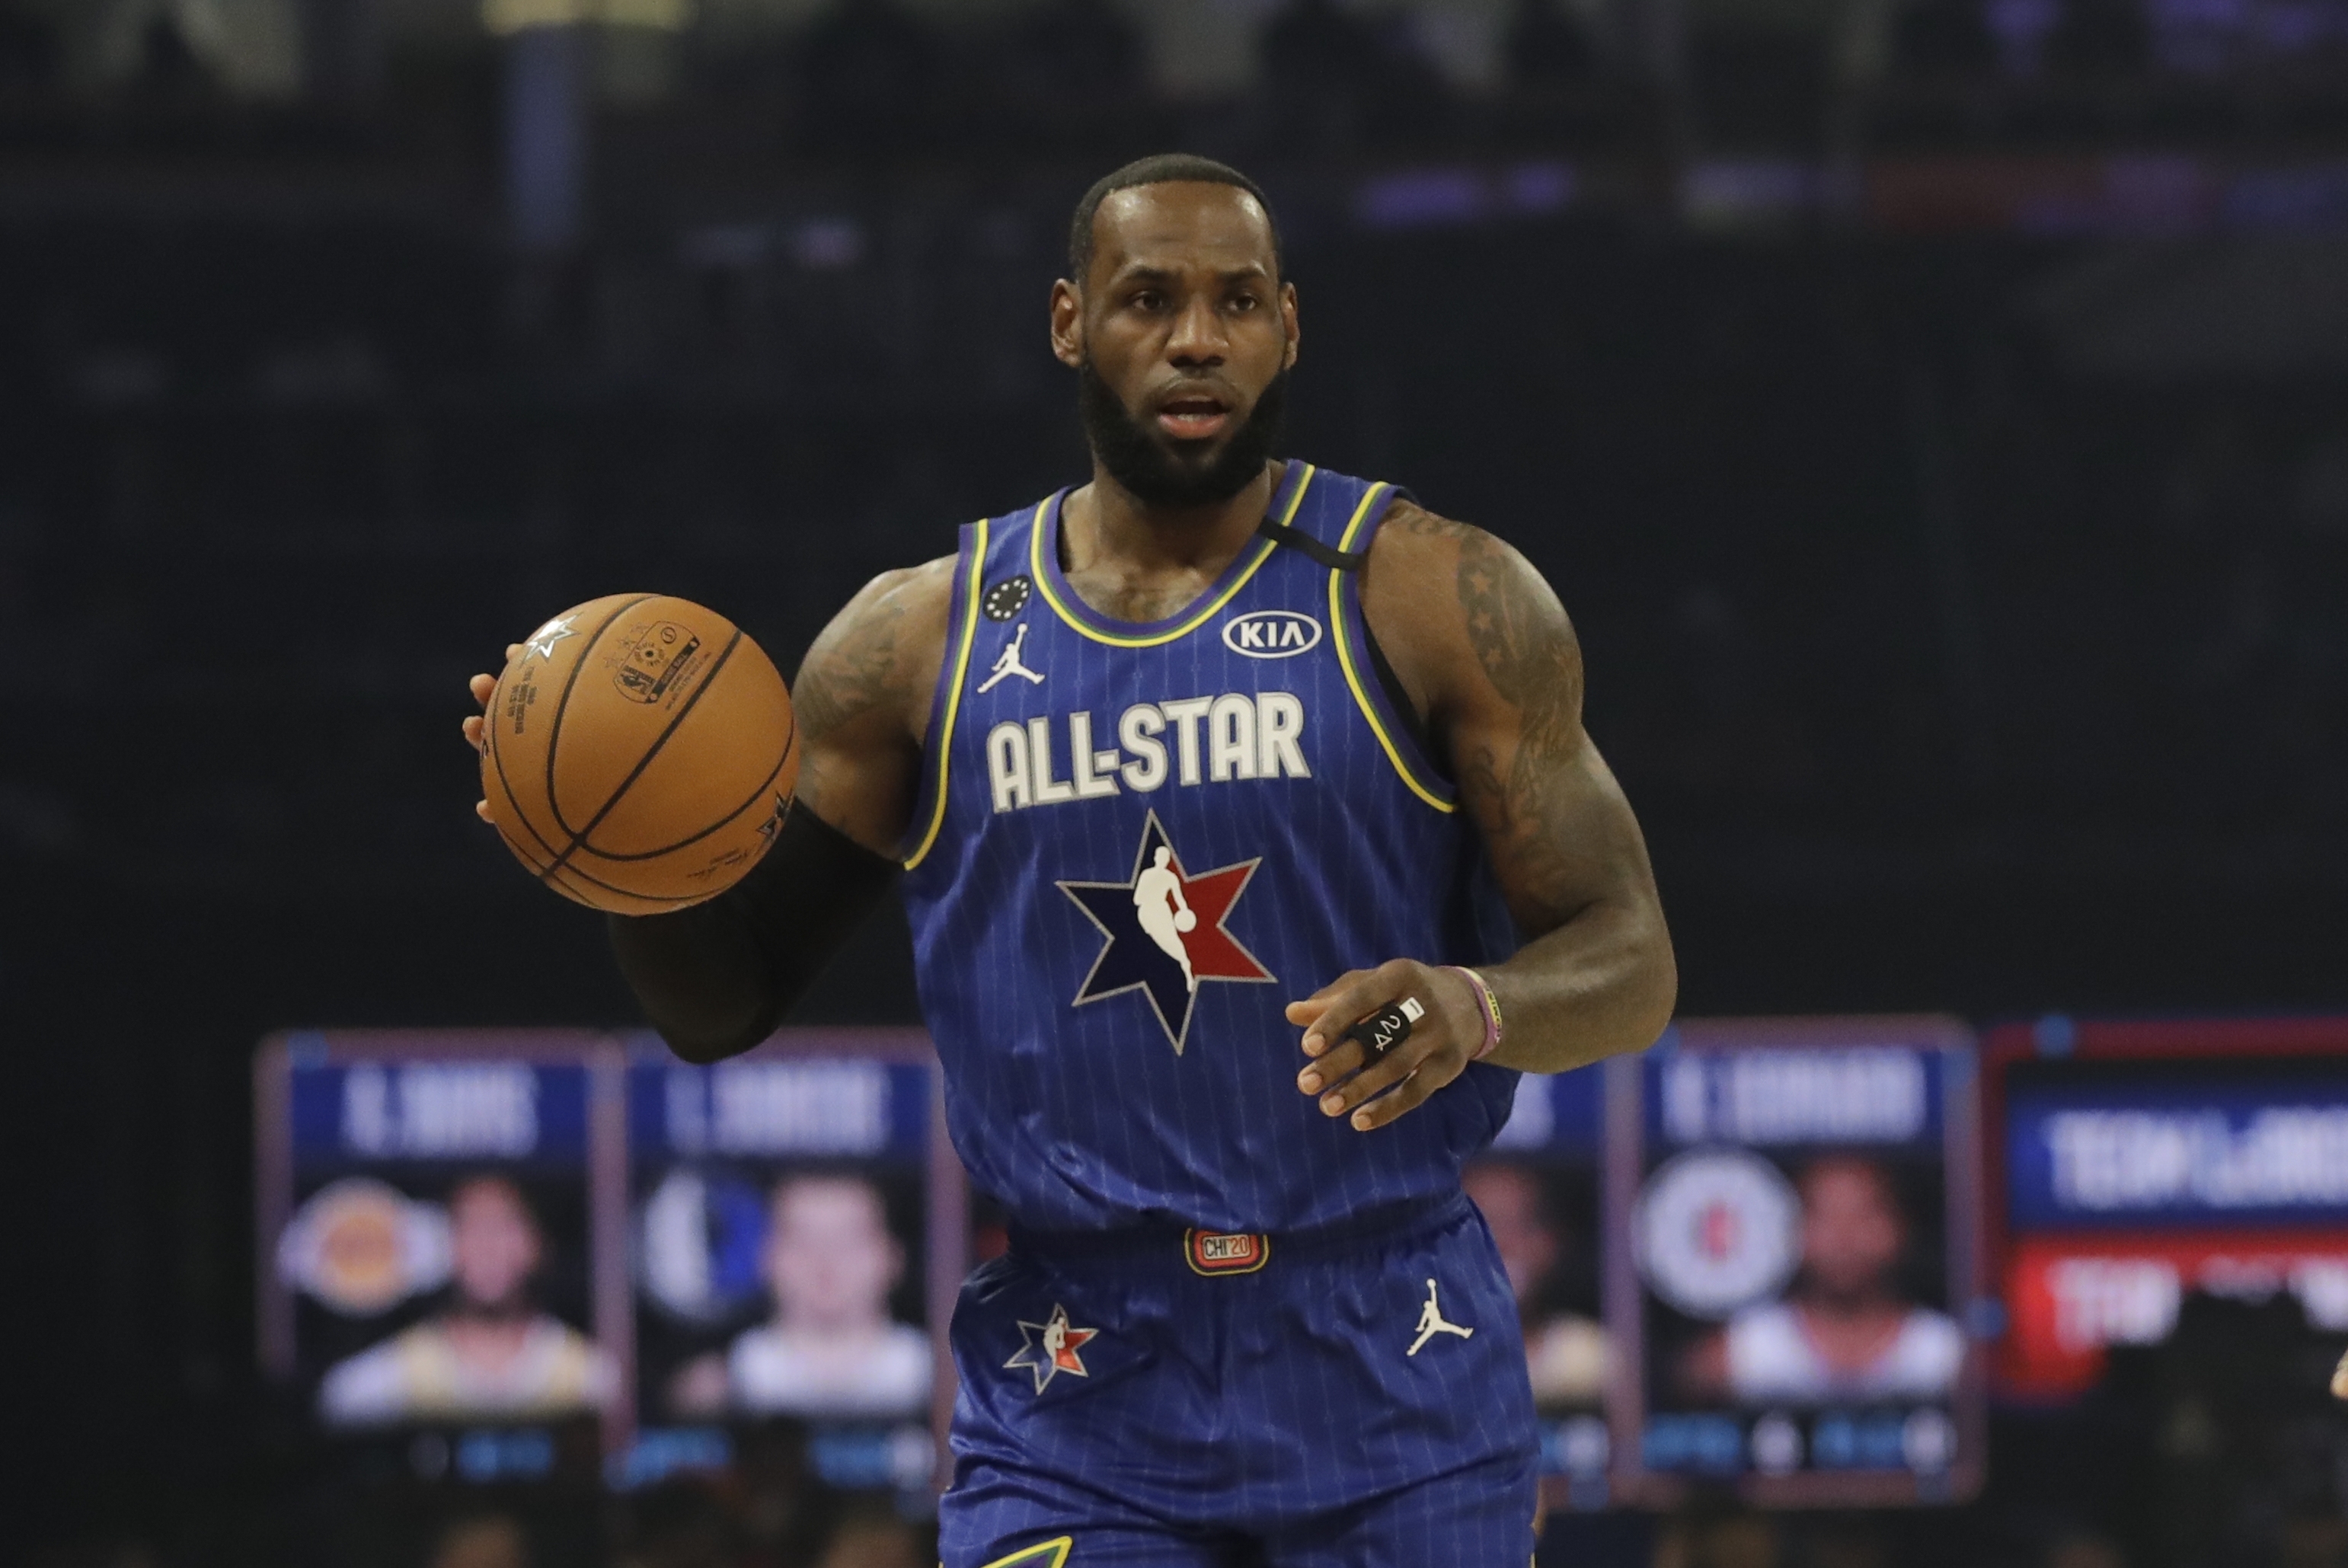 NBA All-Star Draft Show 2021 Live stream, start time, TV channel, how to watch Team LeBron and Team Durant pick